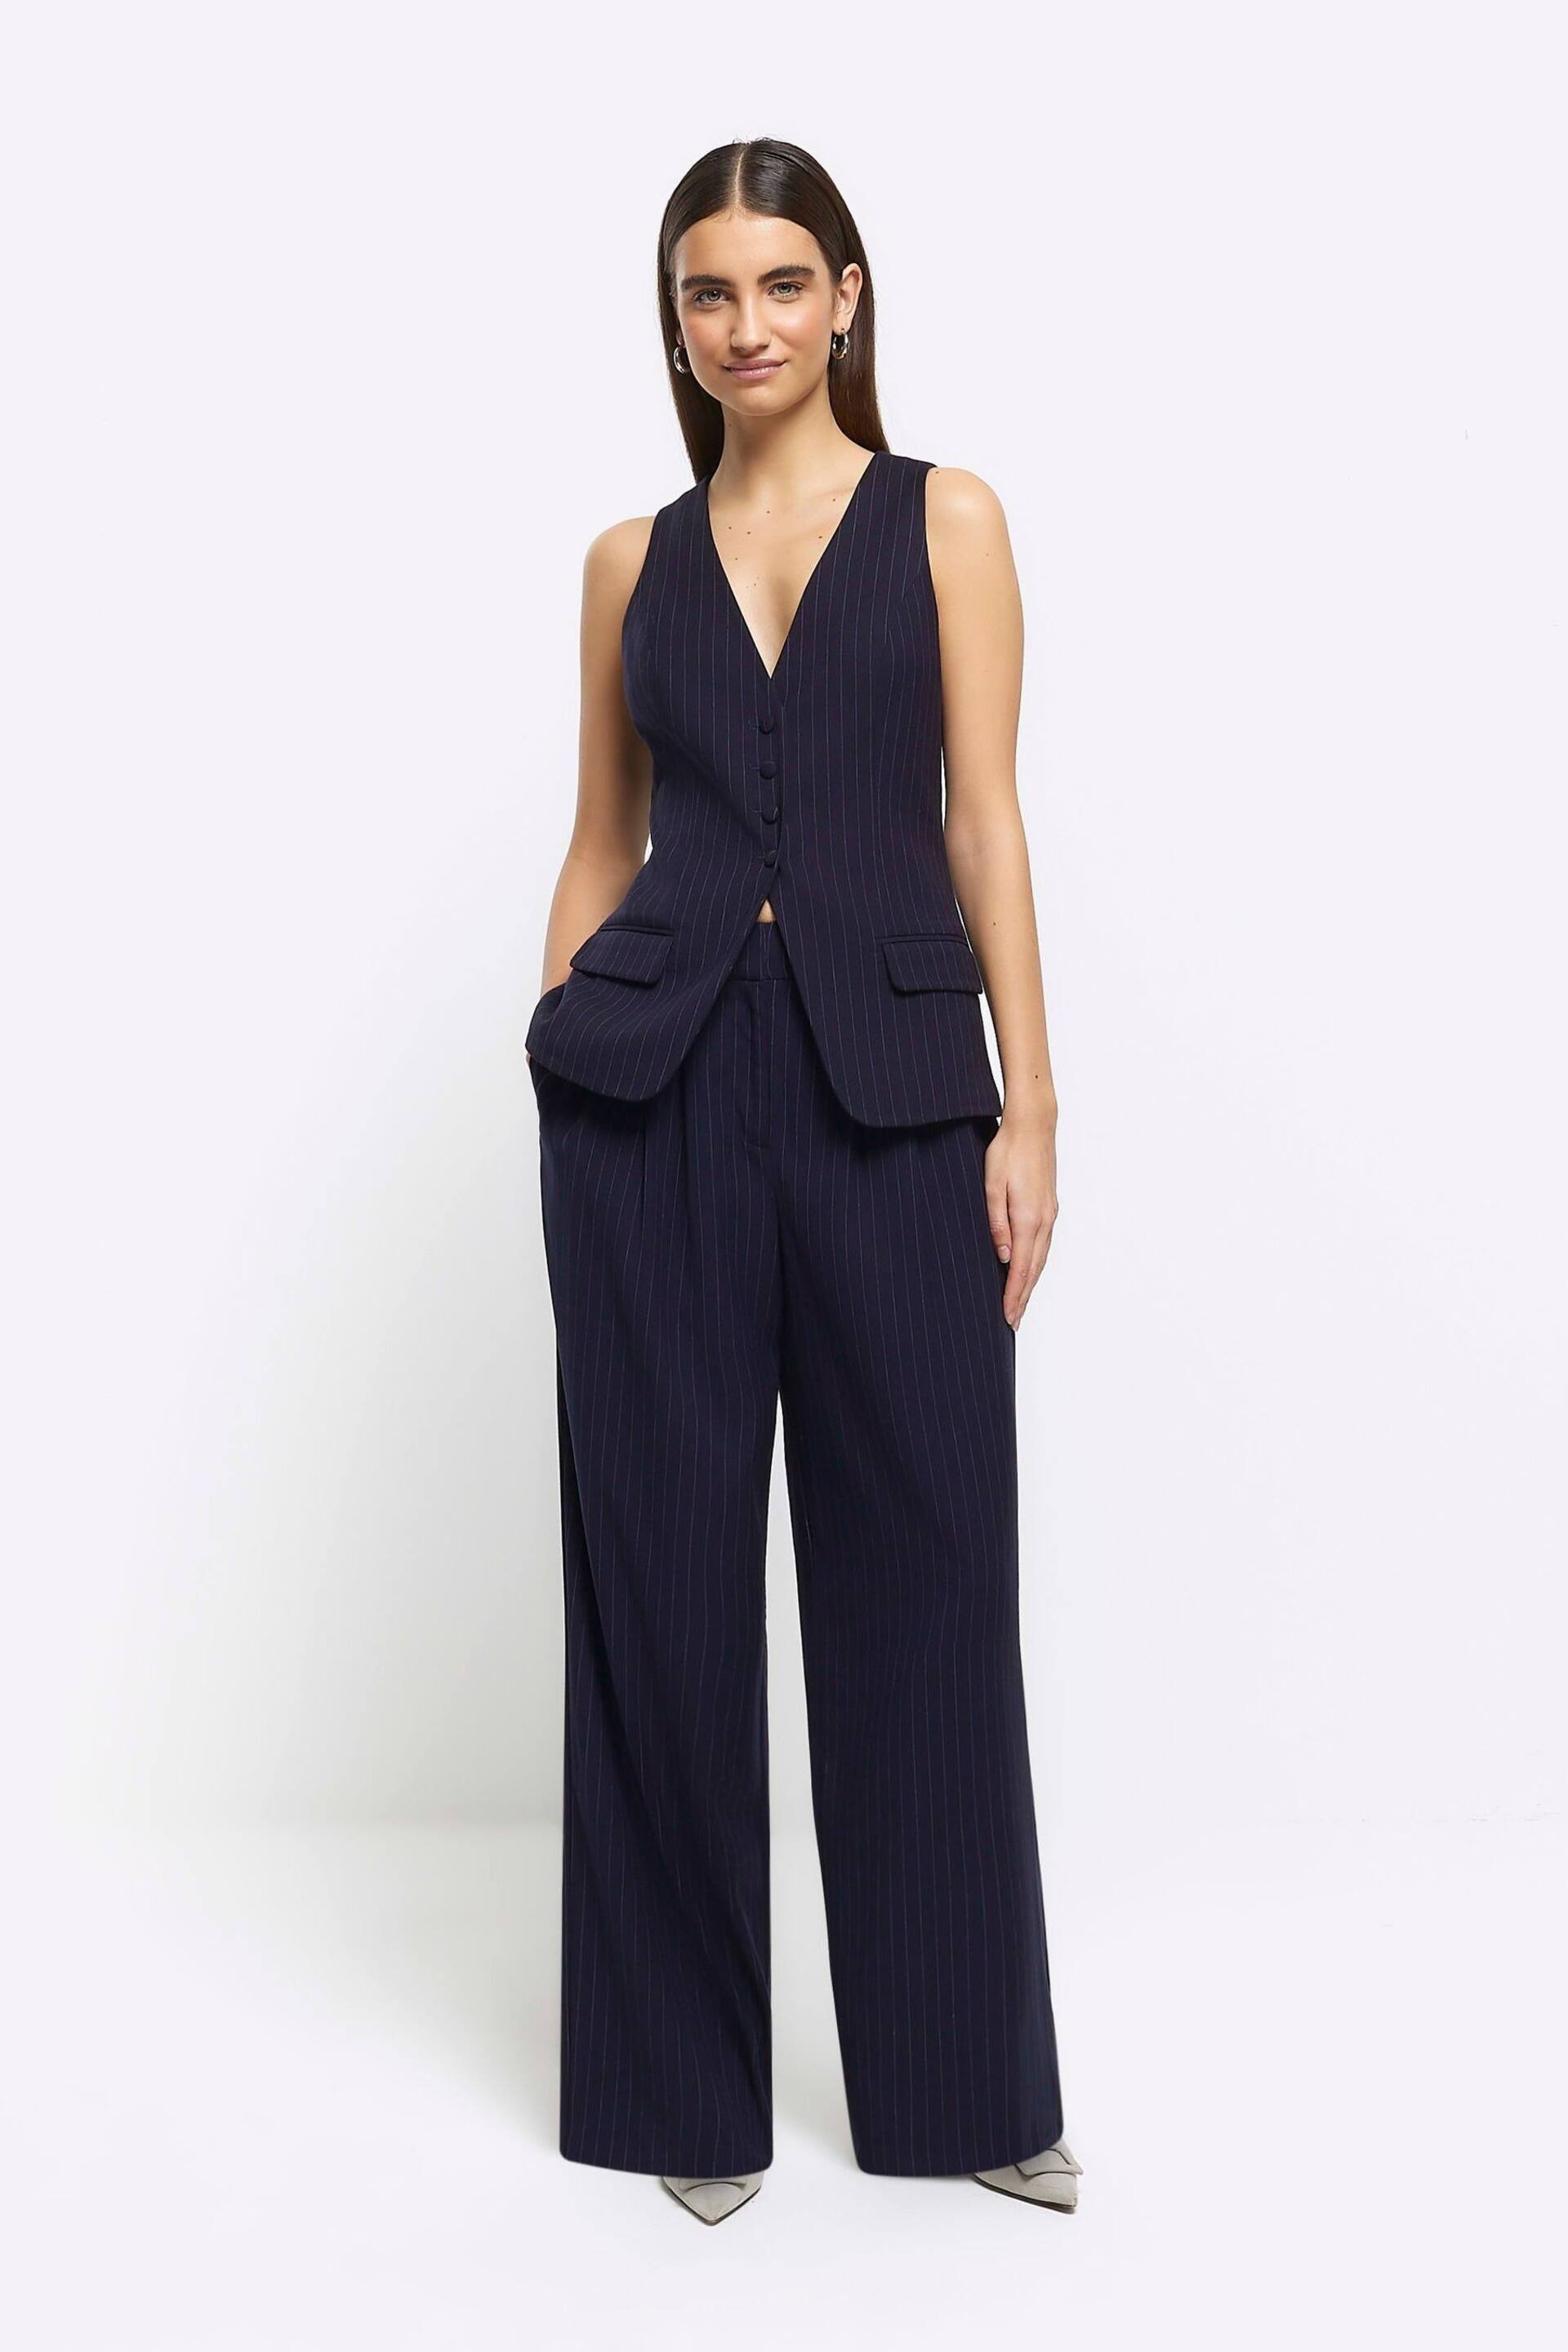 River Island Blue Pinstripe Wide Leg Trousers - Image 1 of 4